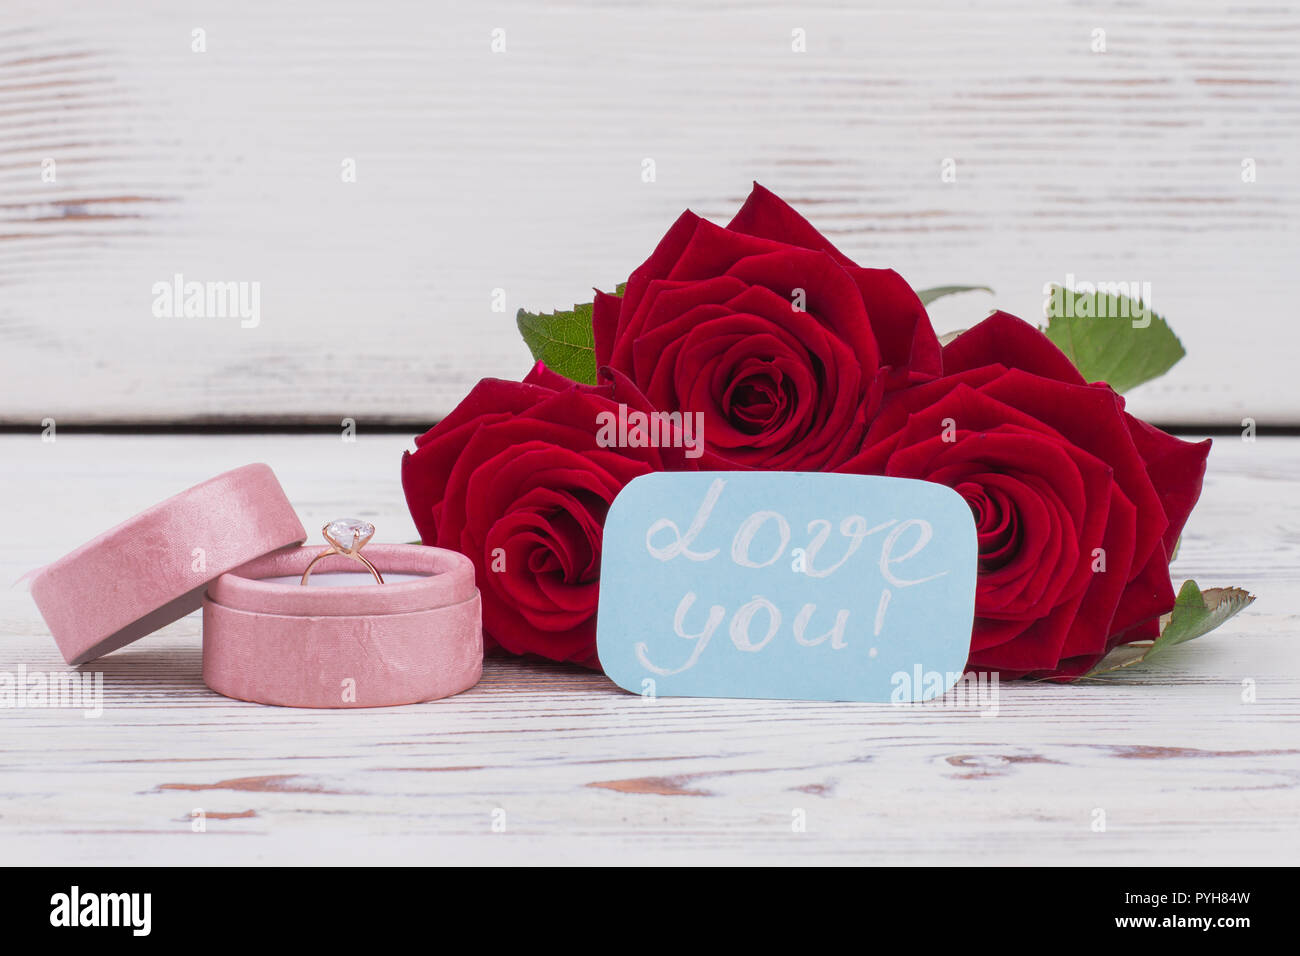 Beautiful Fresh Flower Arrangement of Red Roses, Gift Box and Text Wish,  Birthday Greeting Card Concept. Stock Image - Image of blossom, love:  132771025